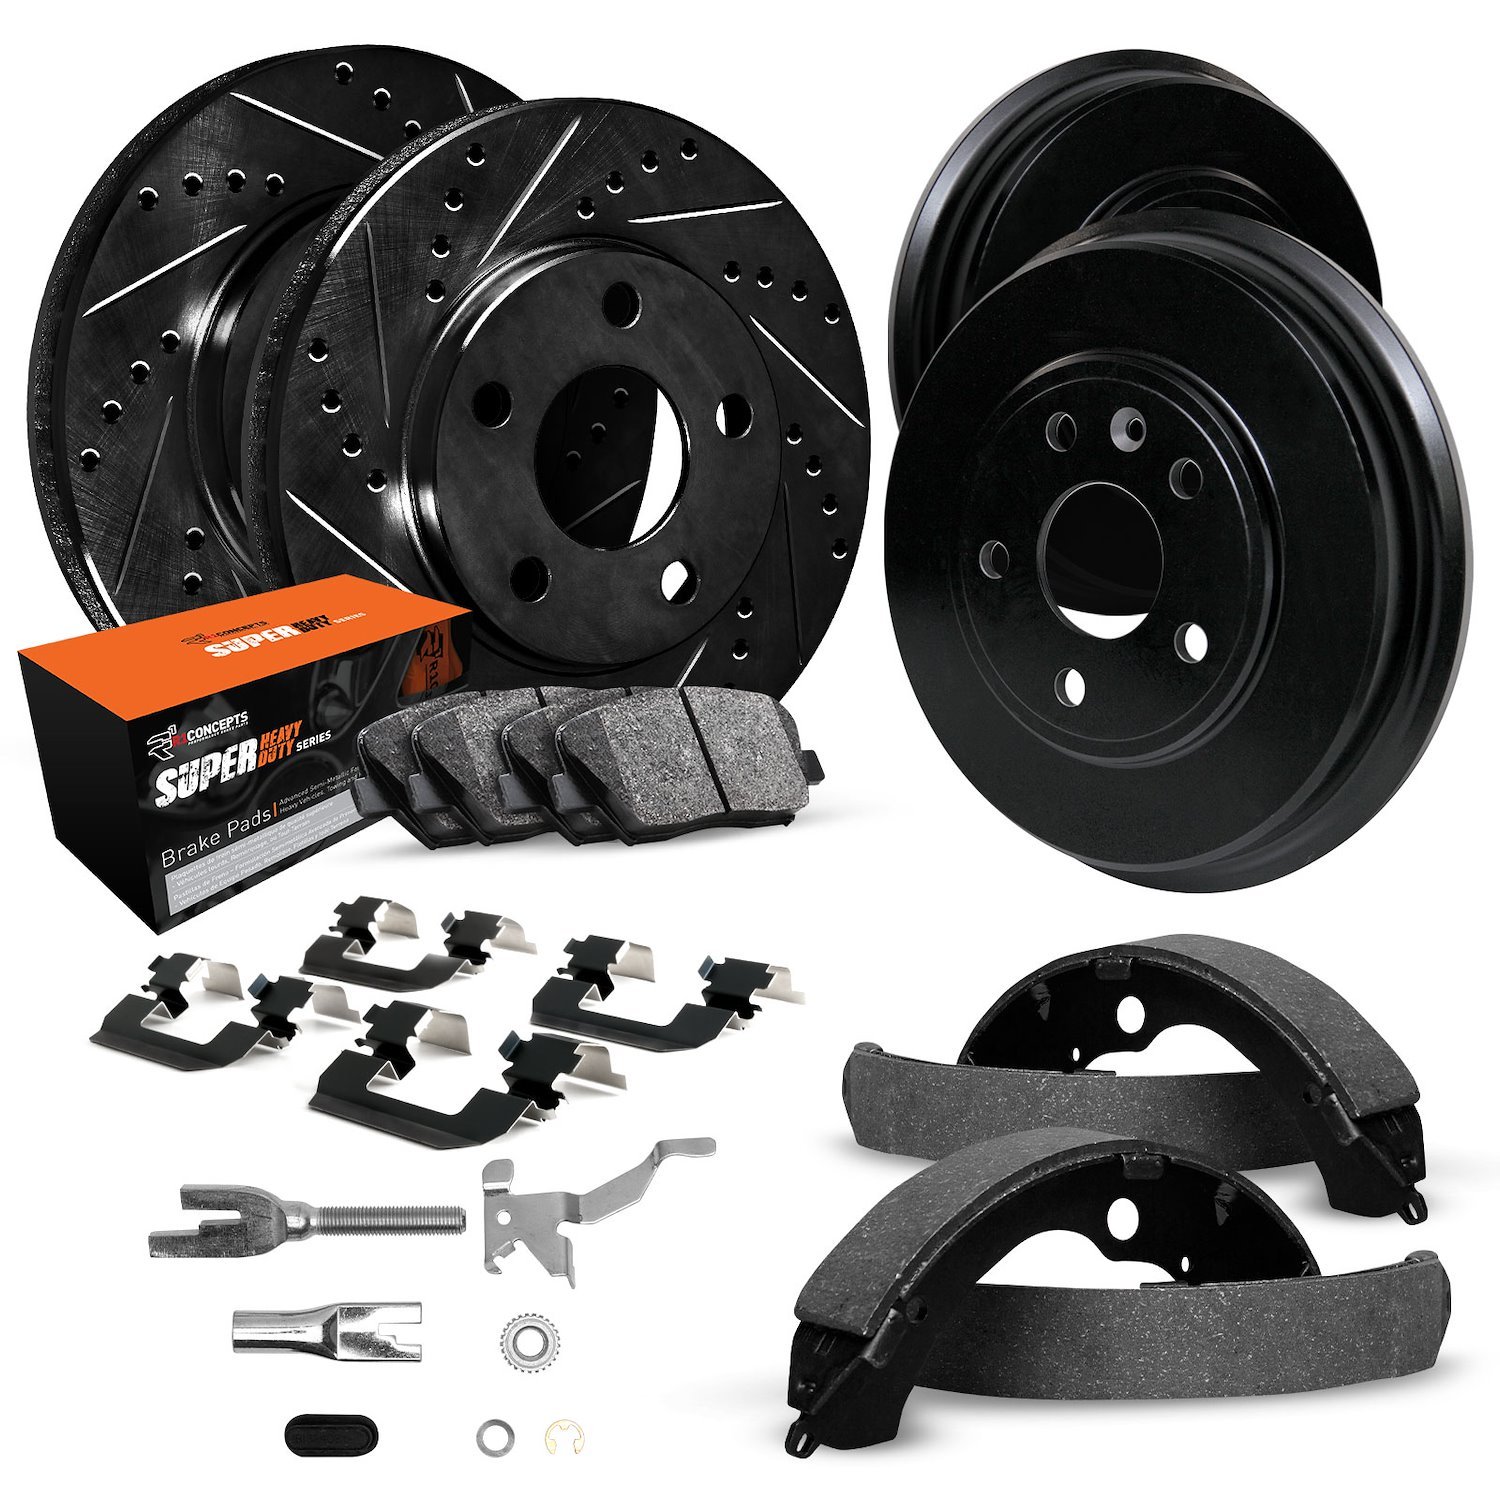 E-Line Drilled/Slotted Black Rotor & Drum Set w/Super-Duty Pads, Shoes, Hardware/Adjusters, Fits Select Lexus/Toyota/Scion